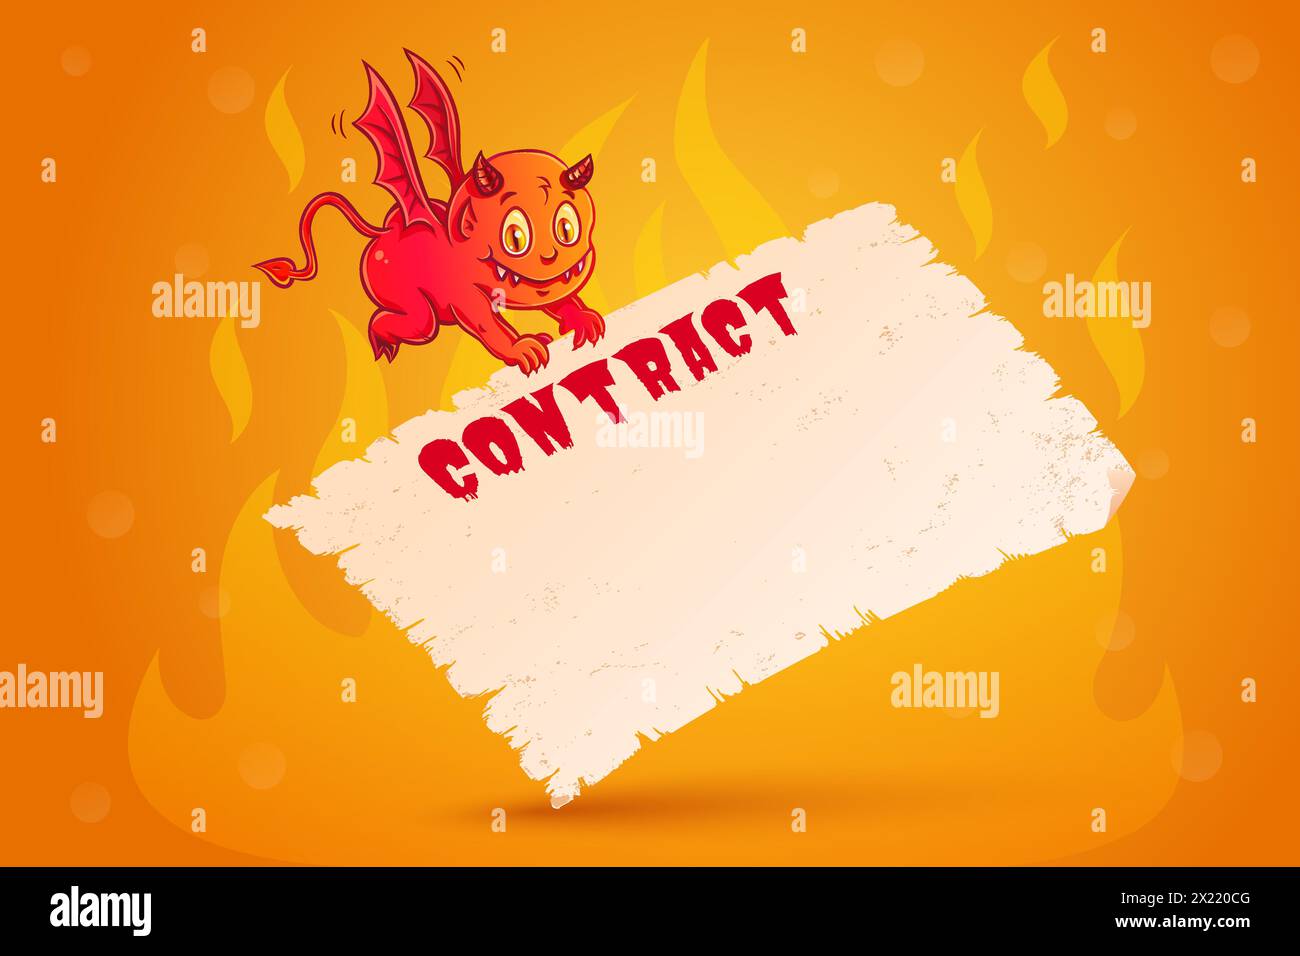 Vector illustration of a cute devil with contract. Devil contract is on old paper. Stock Vector